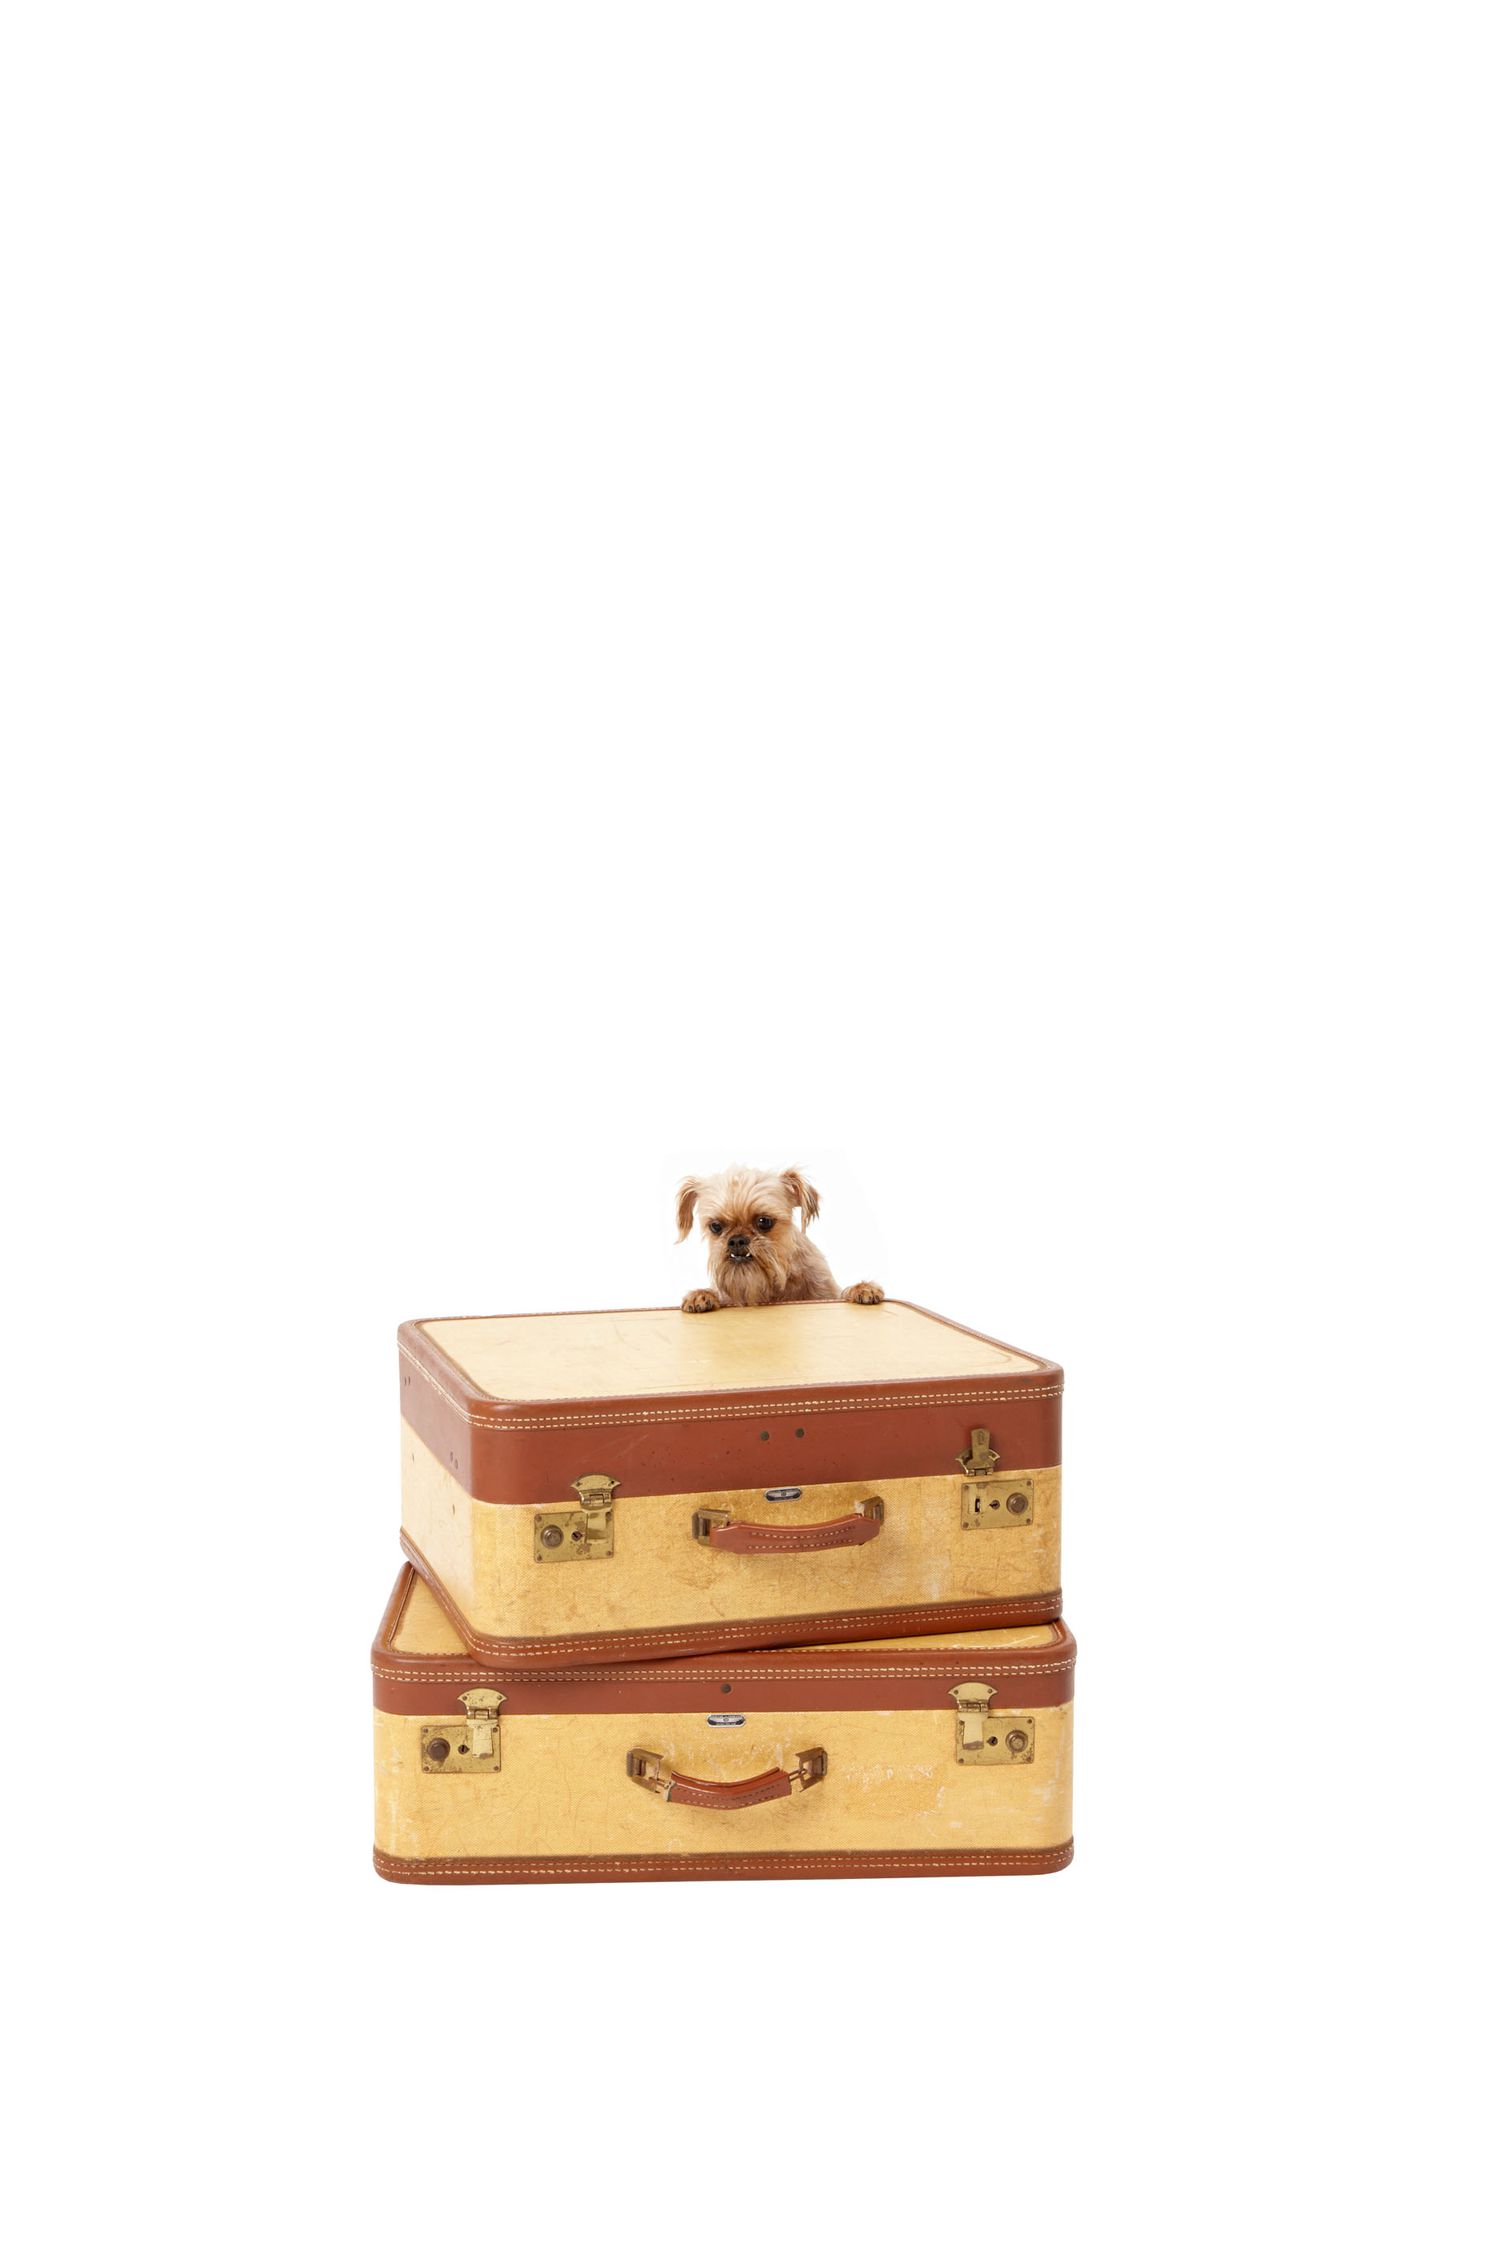 Small dog peering over stack of suitcases